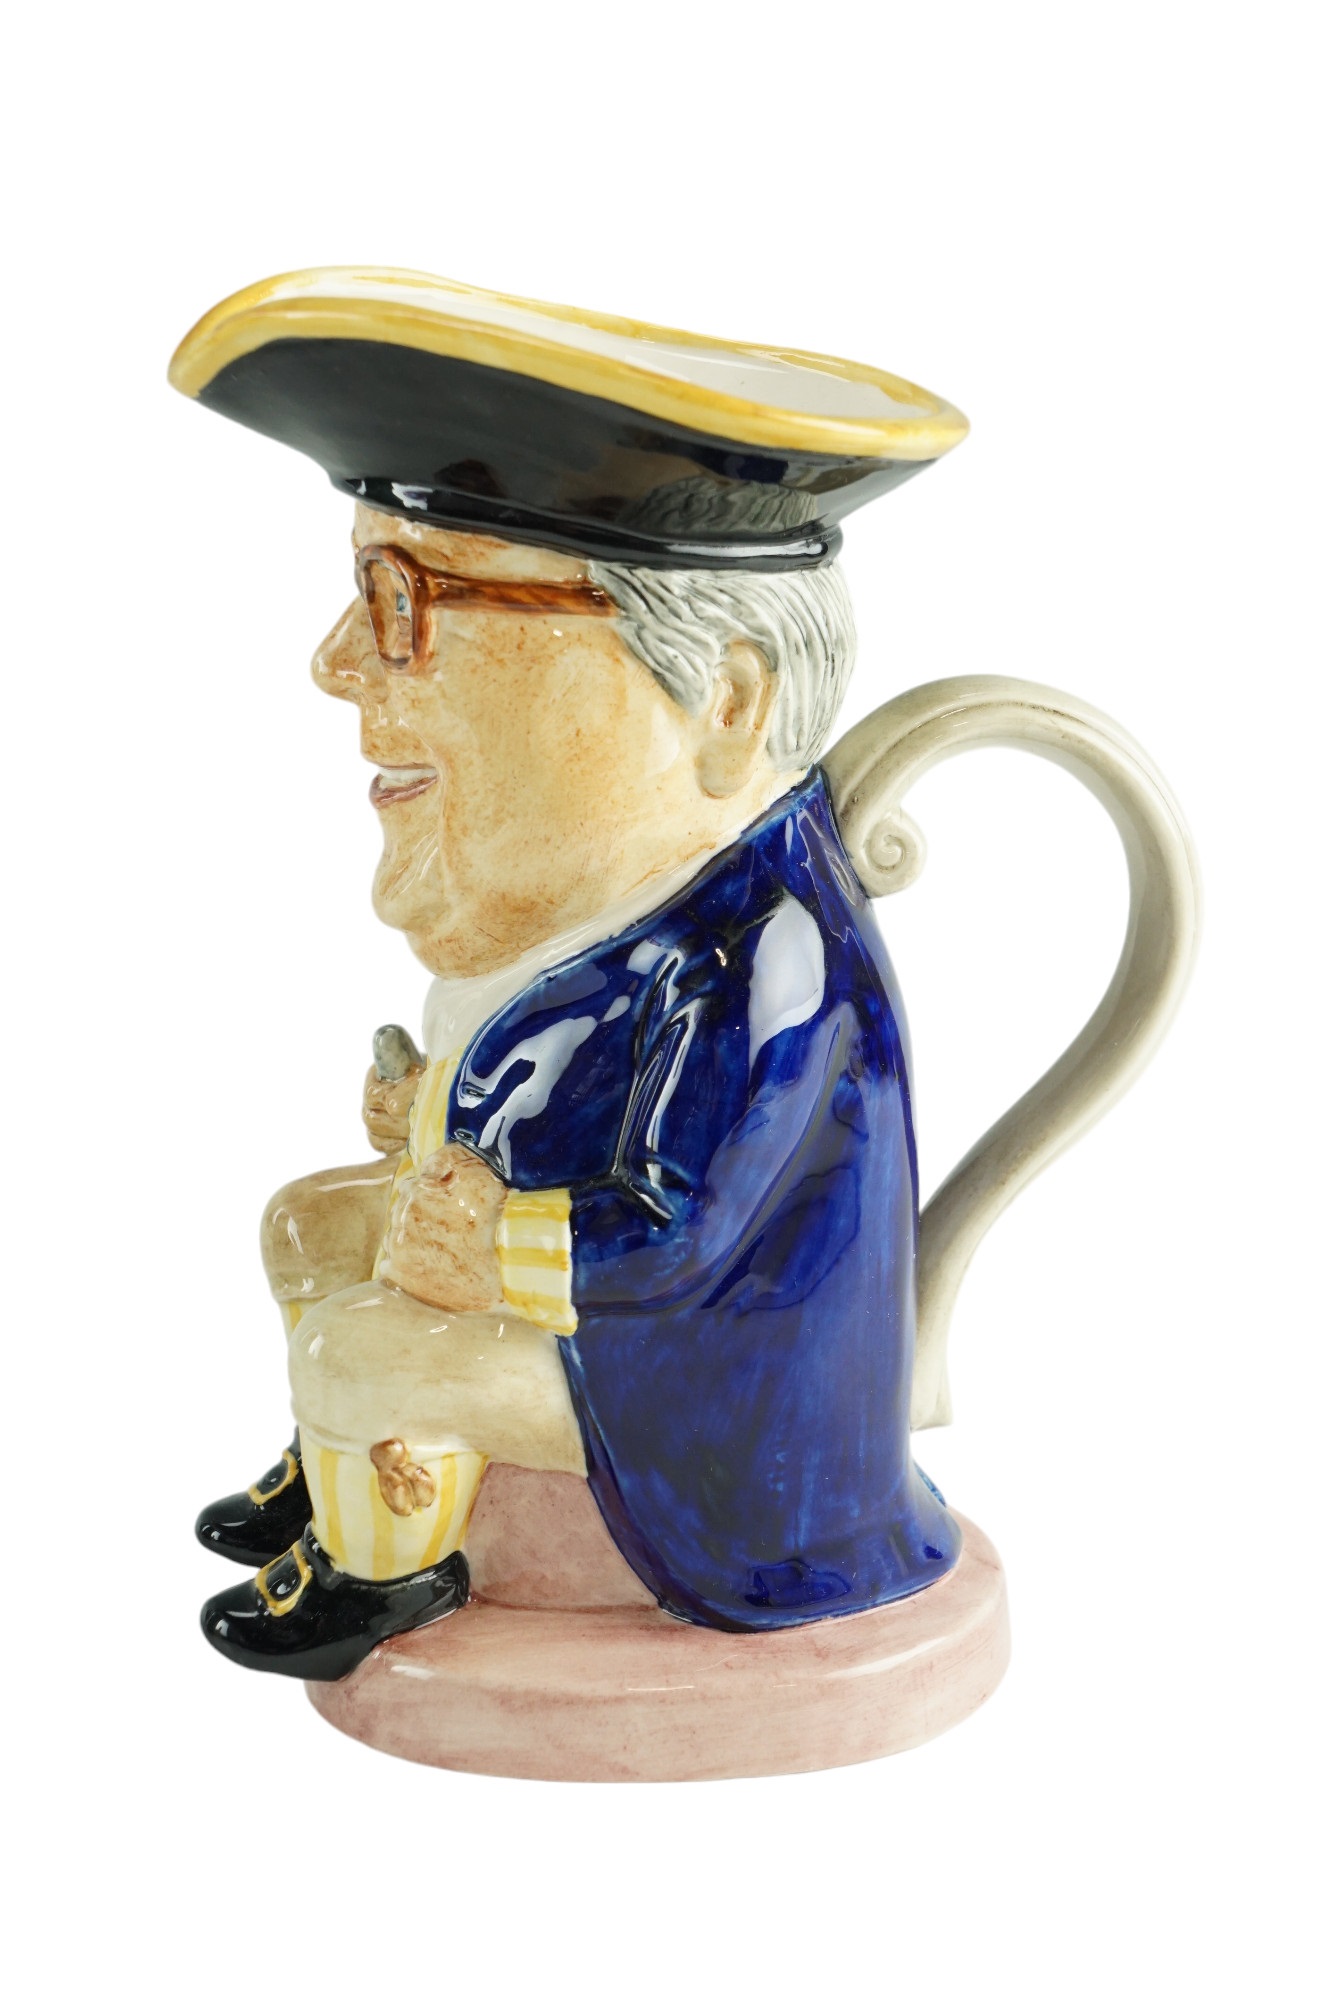 A boxed limited edition Henry Sandon character jug by Kevin Francs Ceramics, numbered 310/750, - Image 2 of 8